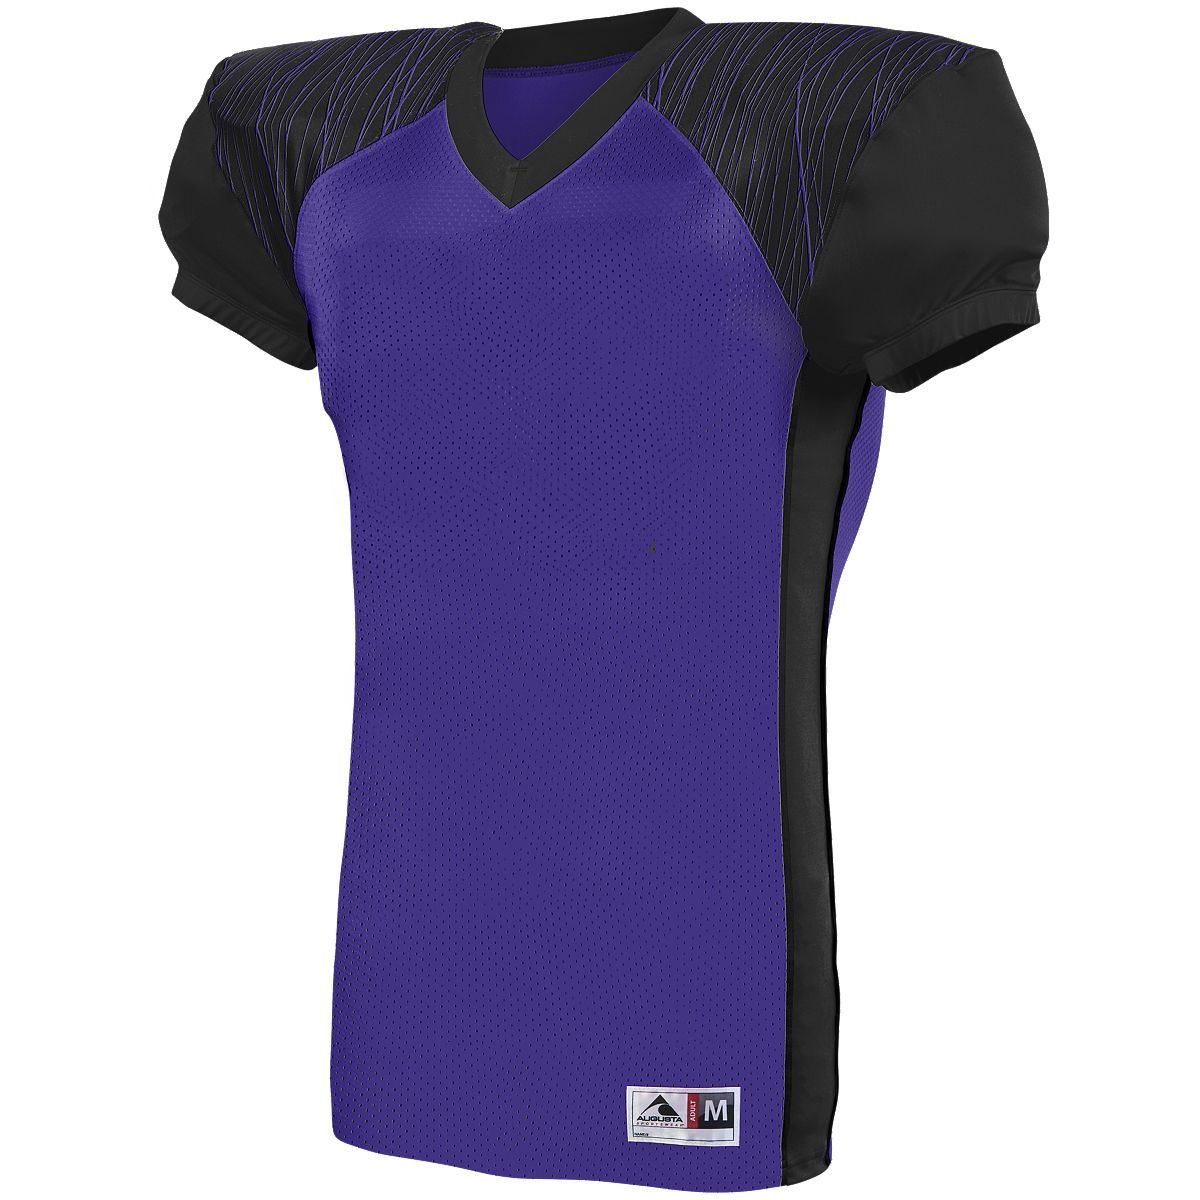 Augusta Sportswear Zone Play Jersey in Purple/Black/Purple Print  -Part of the Adult, Adult-Jersey, Augusta-Products, Football, Shirts, All-Sports, All-Sports-1 product lines at KanaleyCreations.com